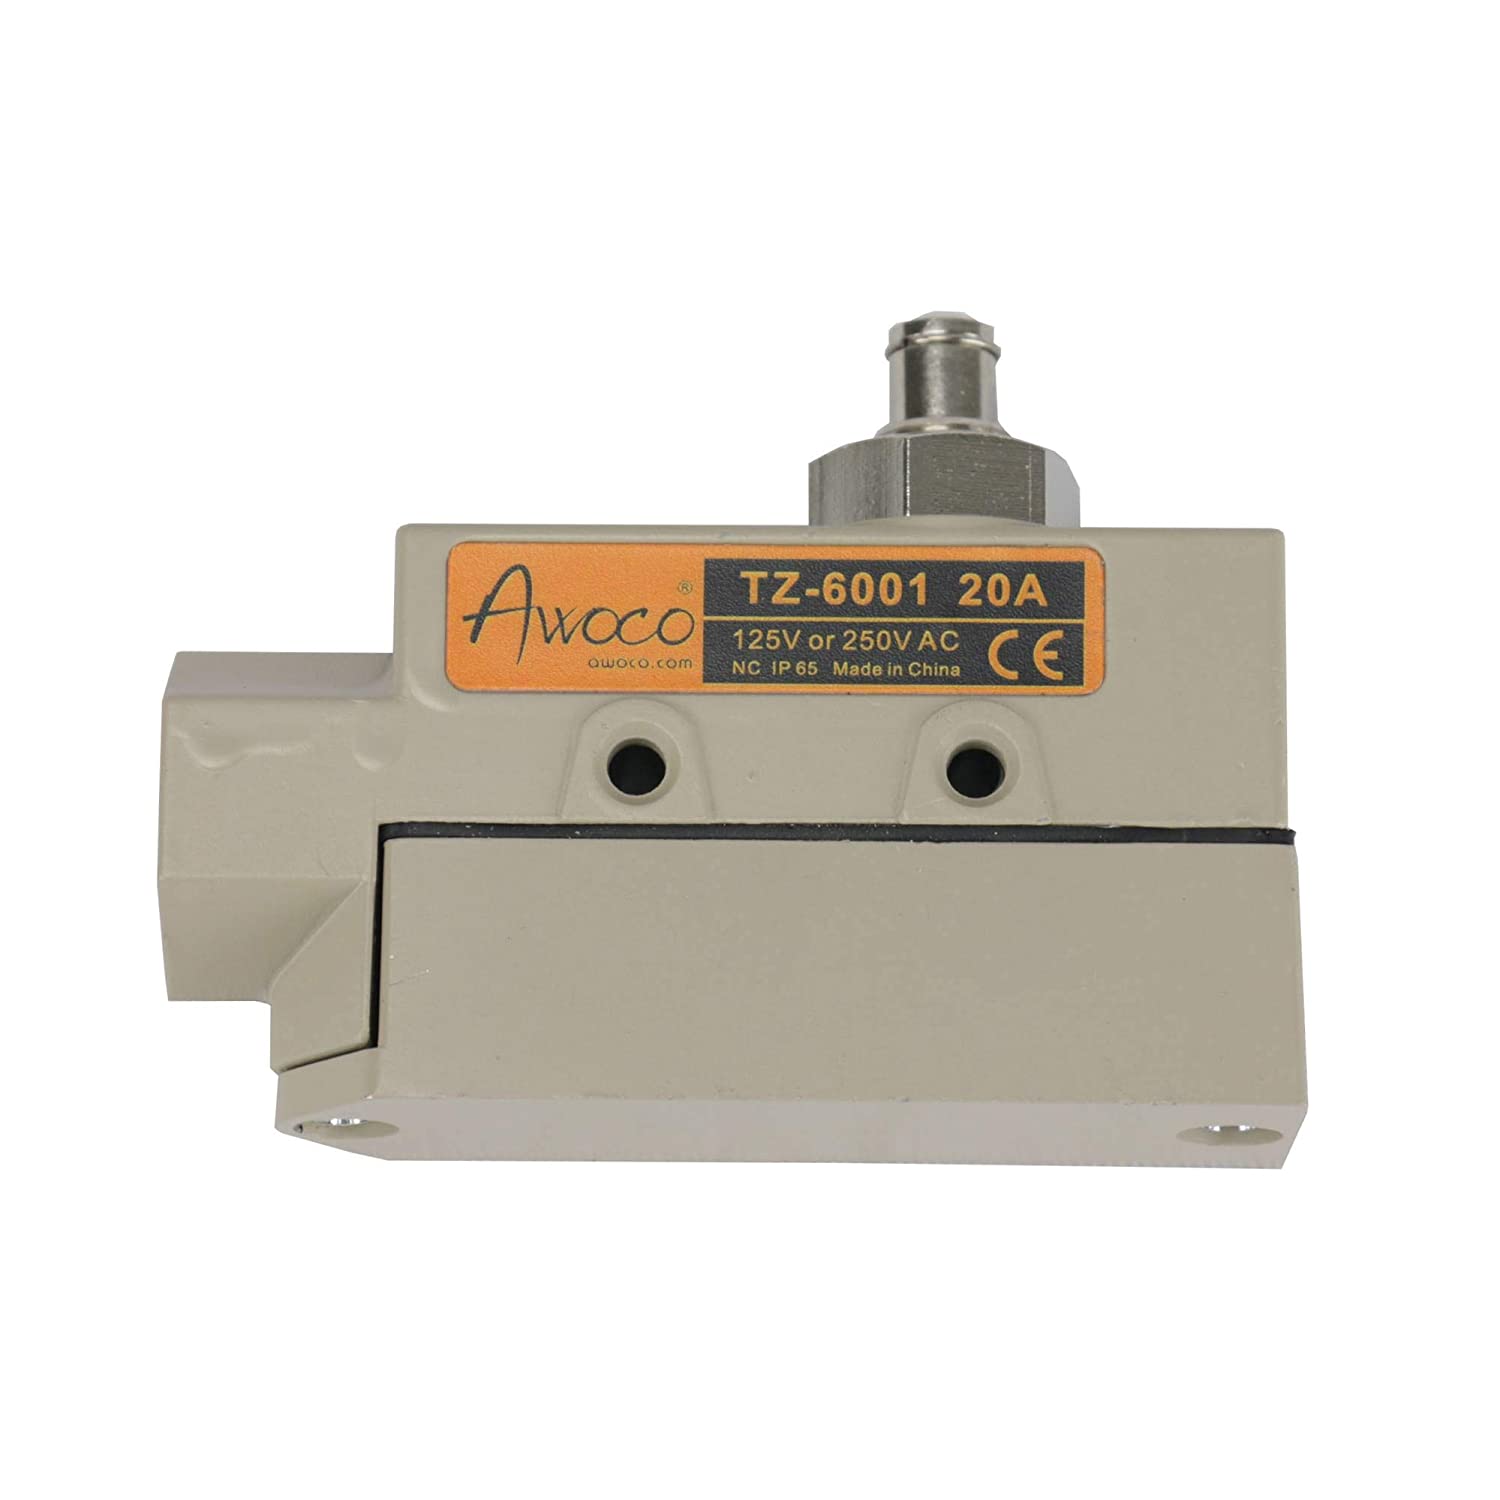 Awoco TZ-6001-20A Heavy Duty Commercial Plunger Door Micro Switch for Air Curtains, 250V 20A IP 65 Limit Switch Type NO and Type NC